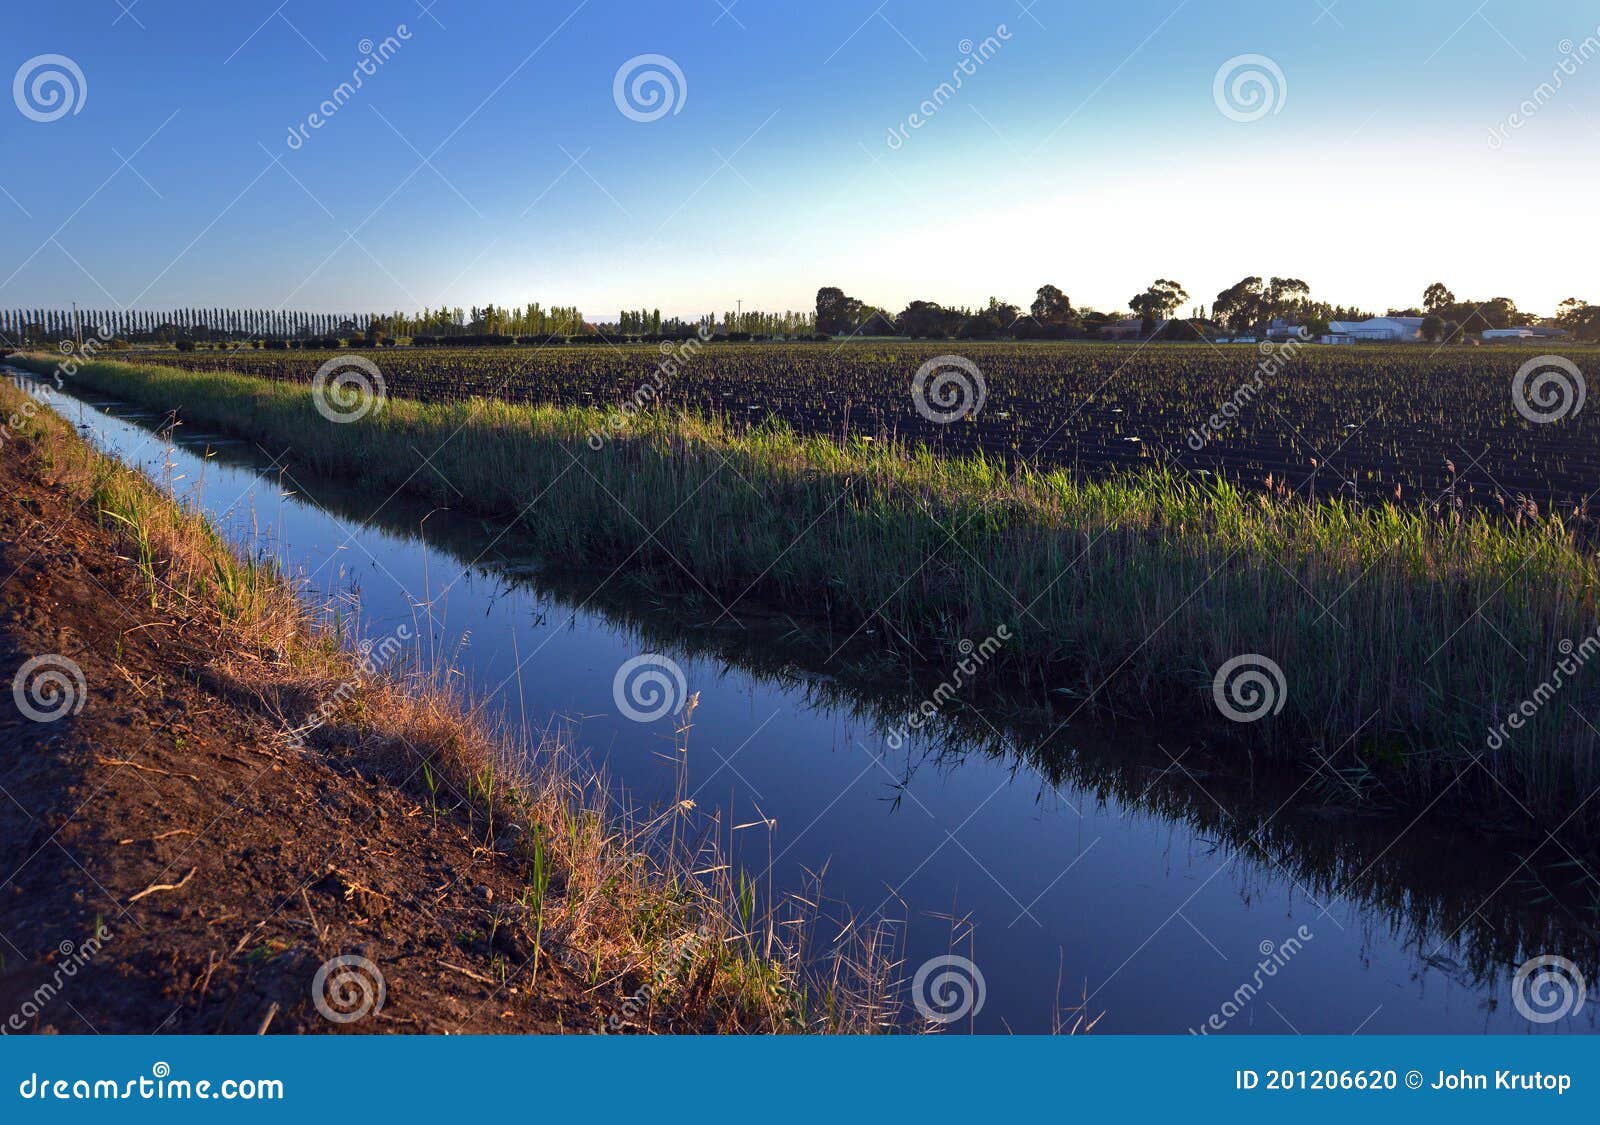 irrigation channels surround asparagus crops in south eastern victoria.